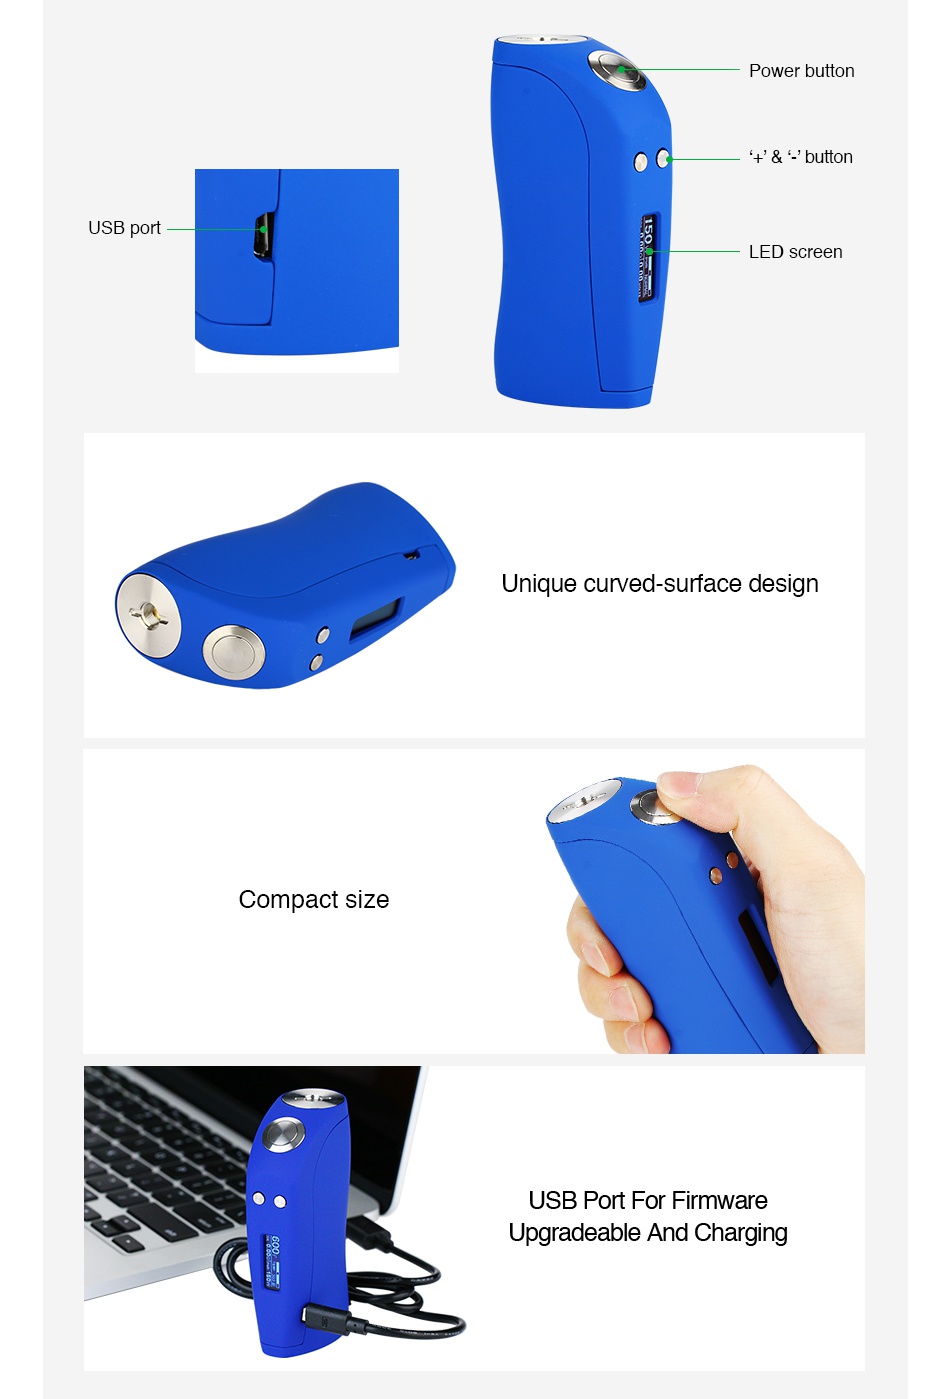 Envii Loch Ness 150W TC Box Mod wer butto     button USB port LED Unique curved surface design Compact size USB Port for firmware Upgradeable And Charging